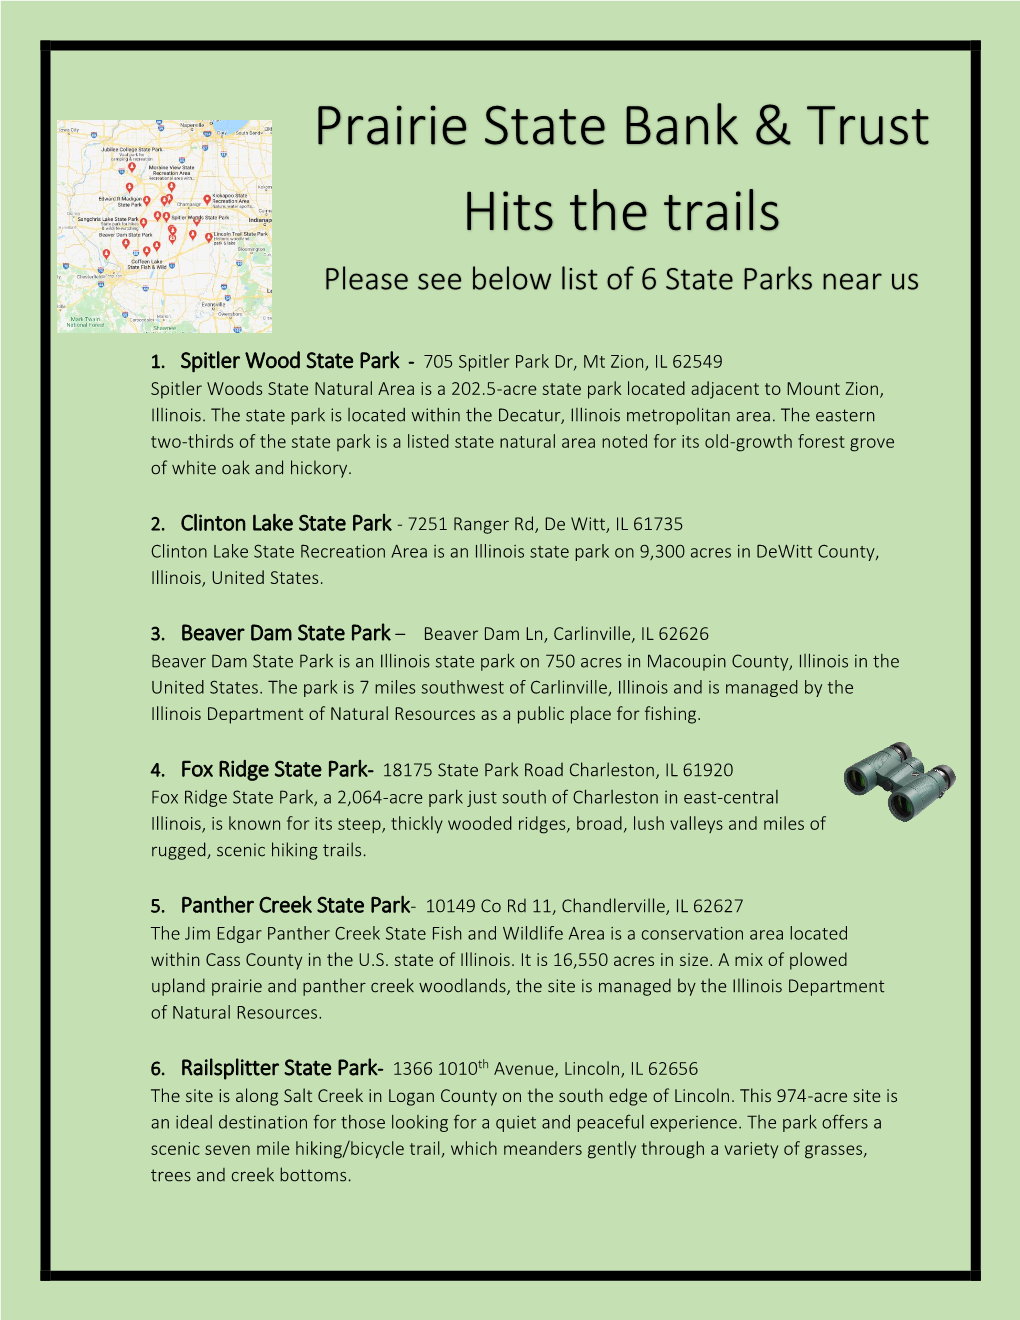 Prairie State Bank & Trust Hits the Trails